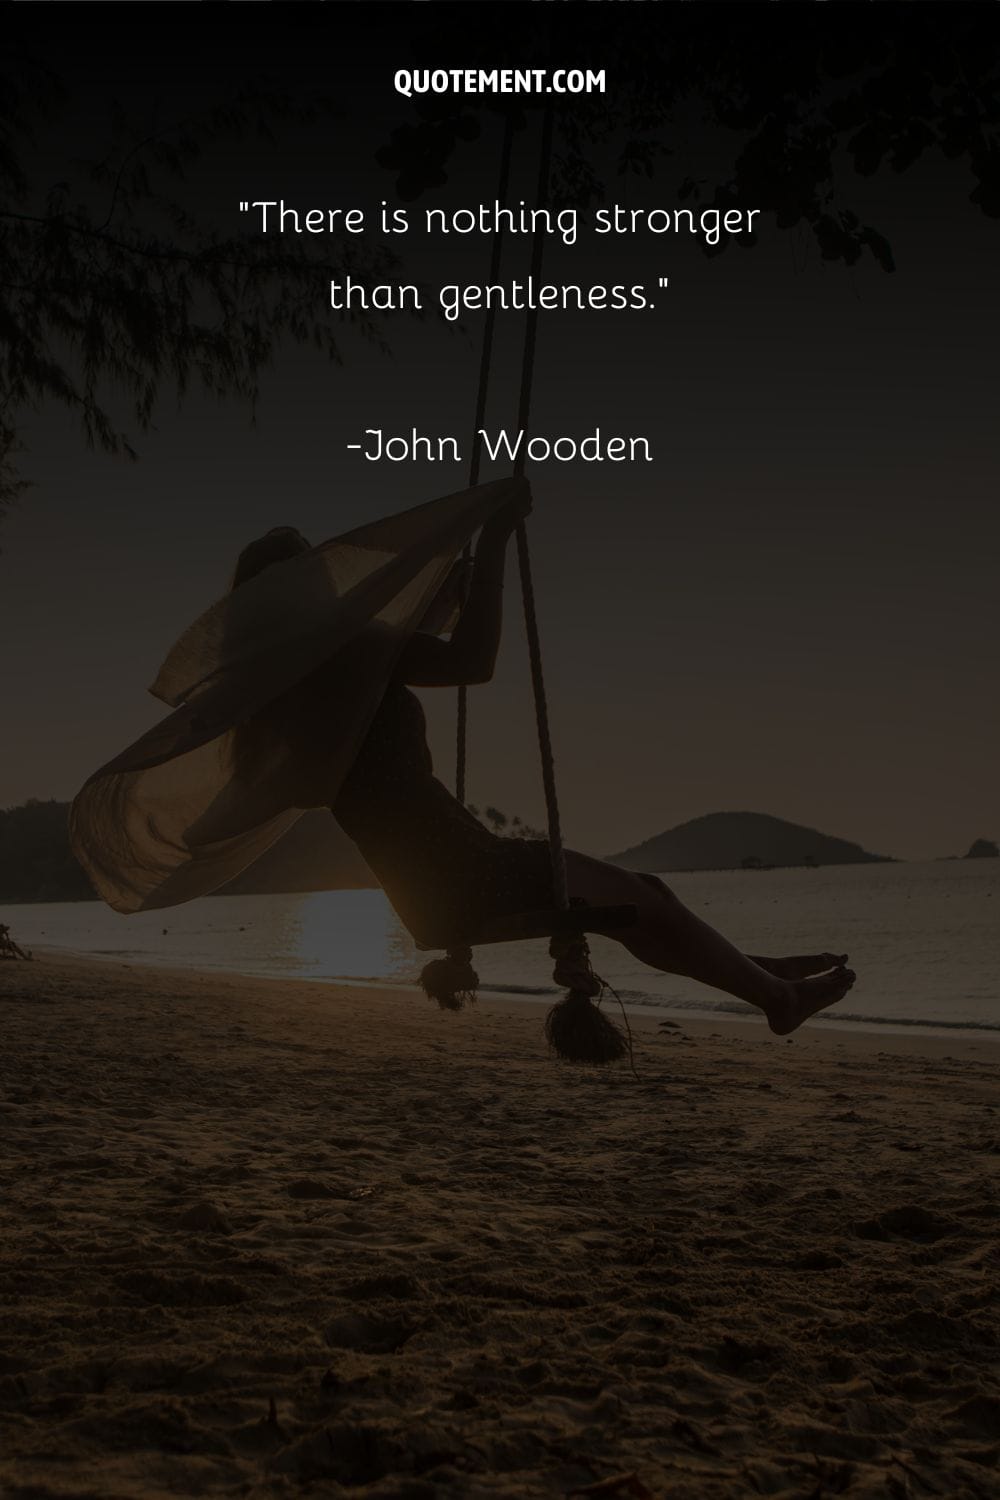 There is nothing stronger than gentleness.